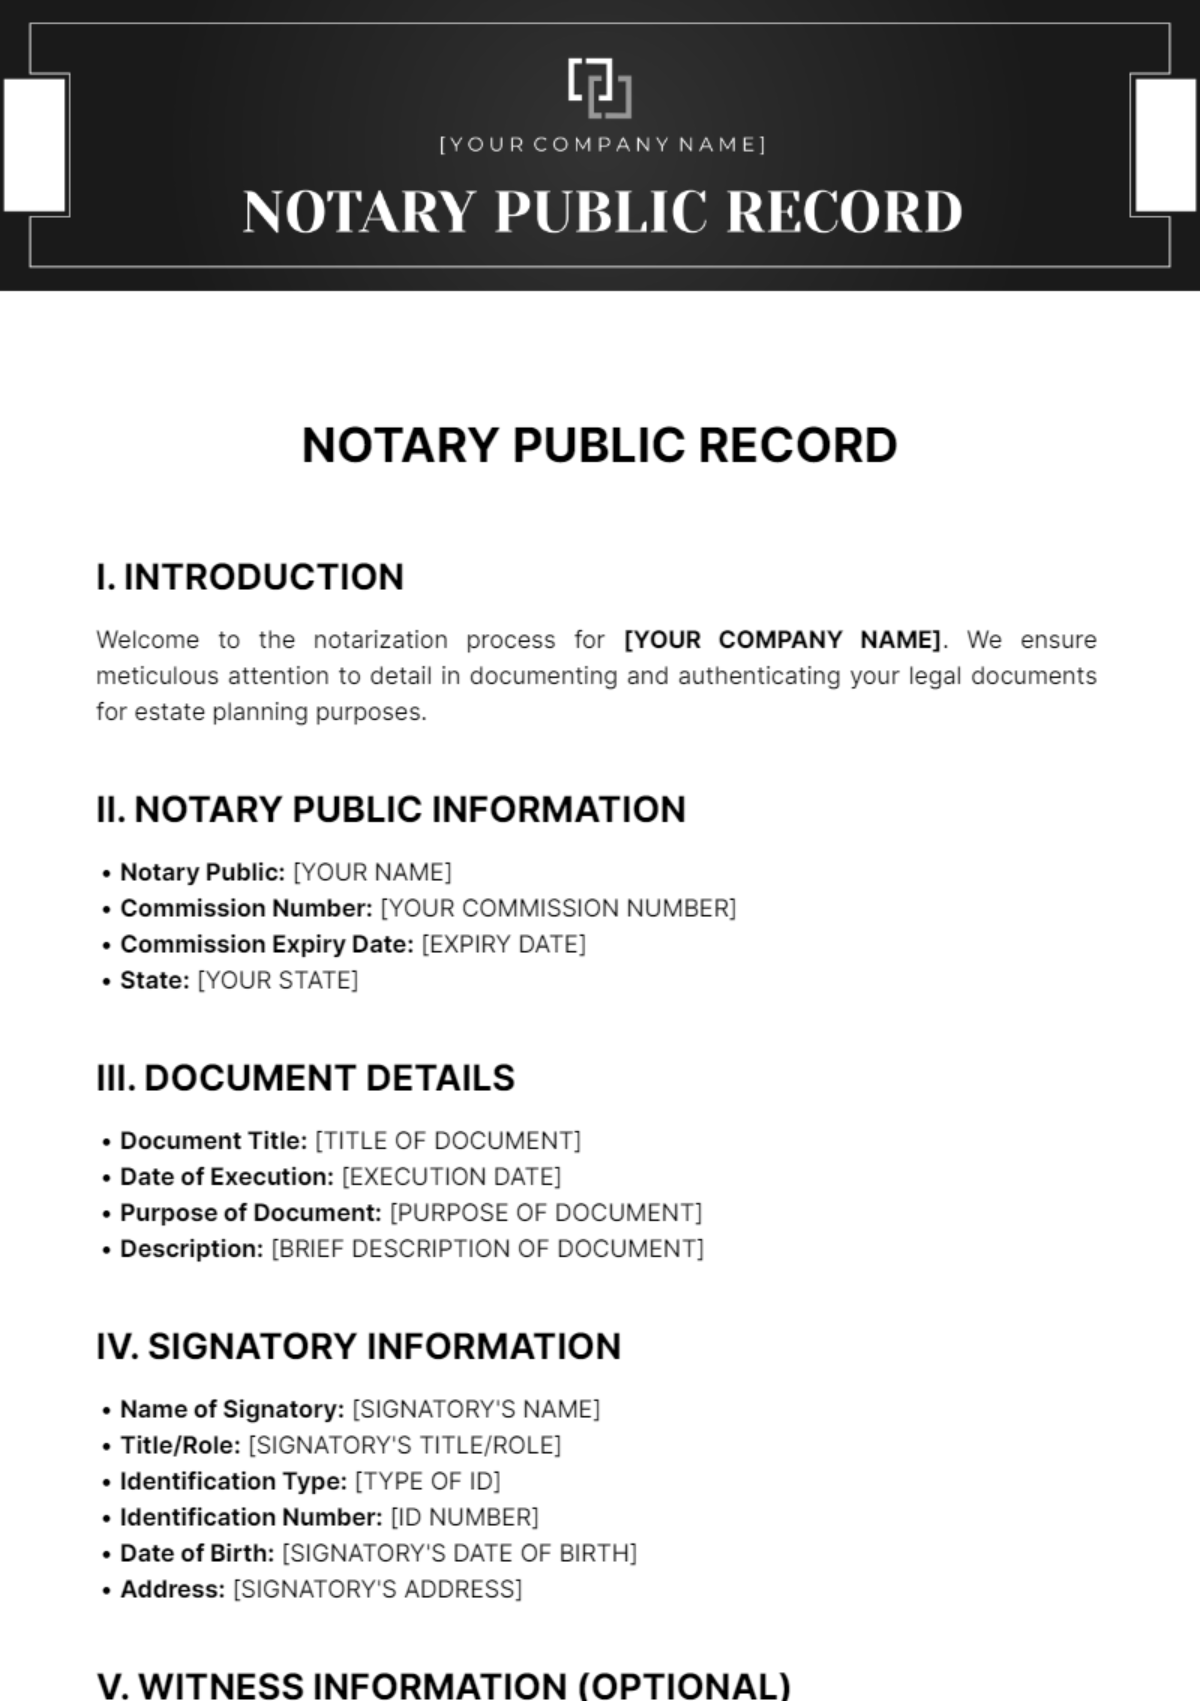 Notary Public Record Template